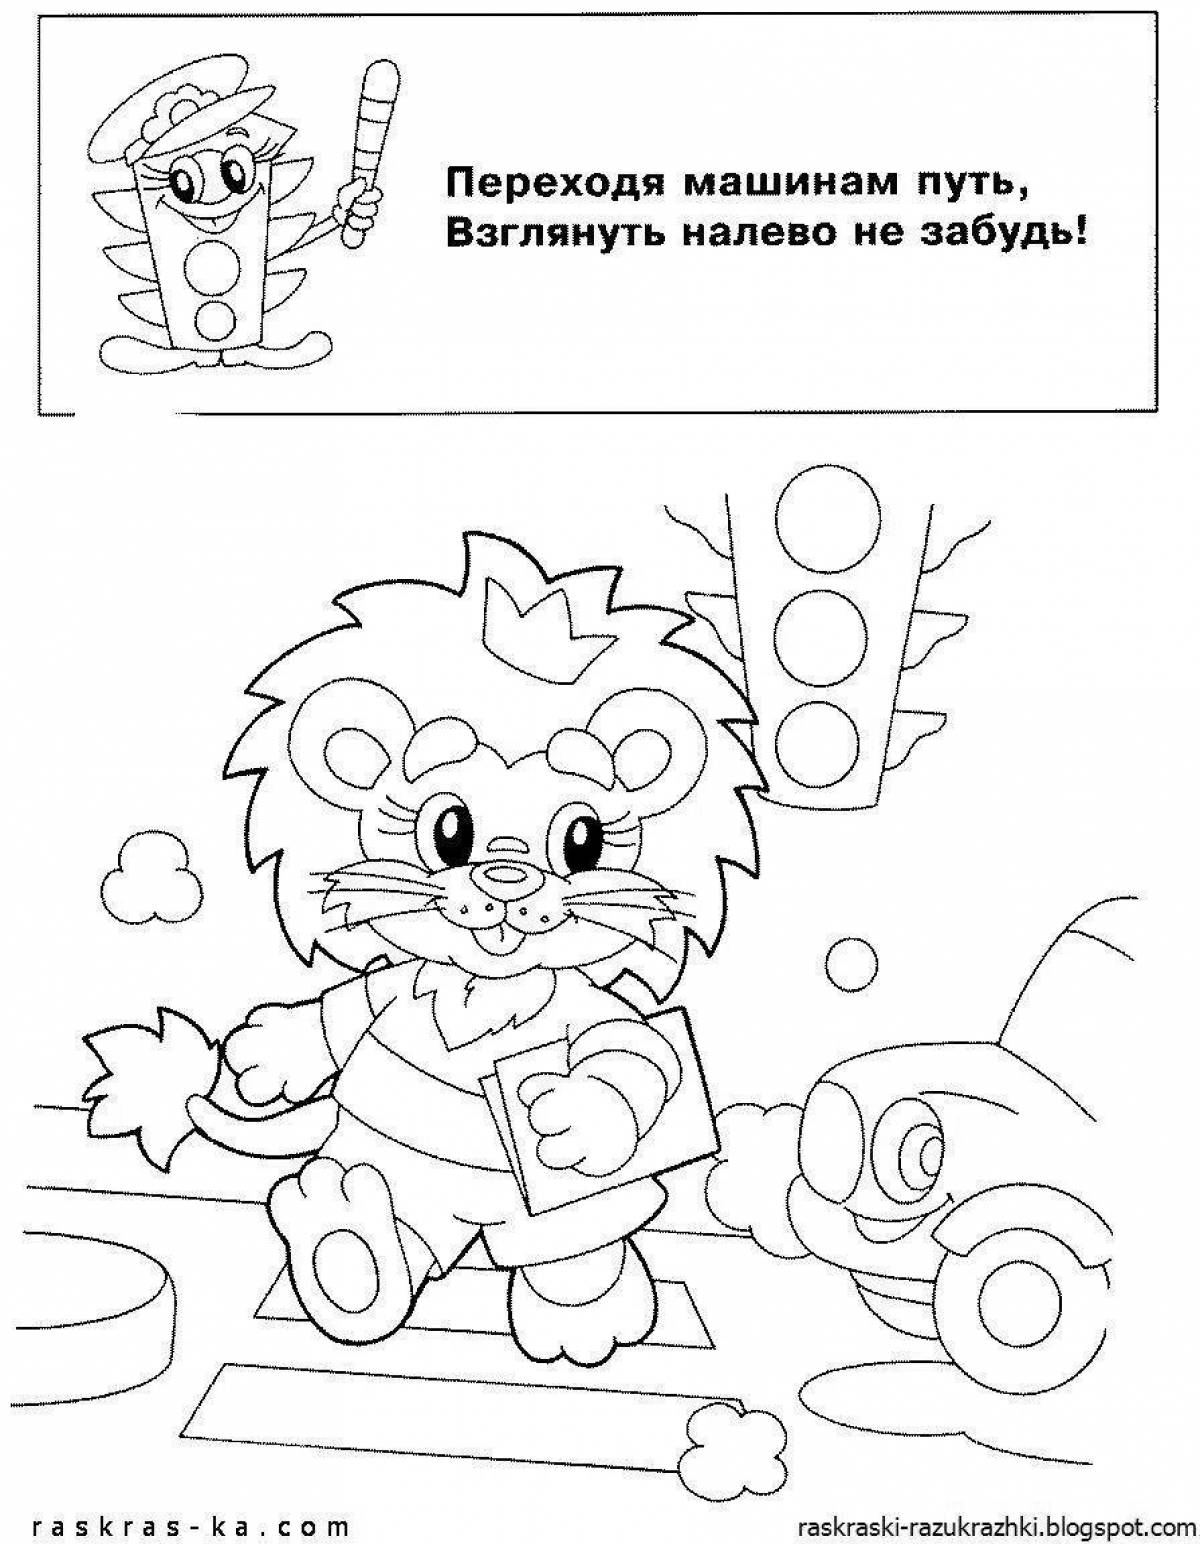 Colorful safety alphabet coloring page for kids